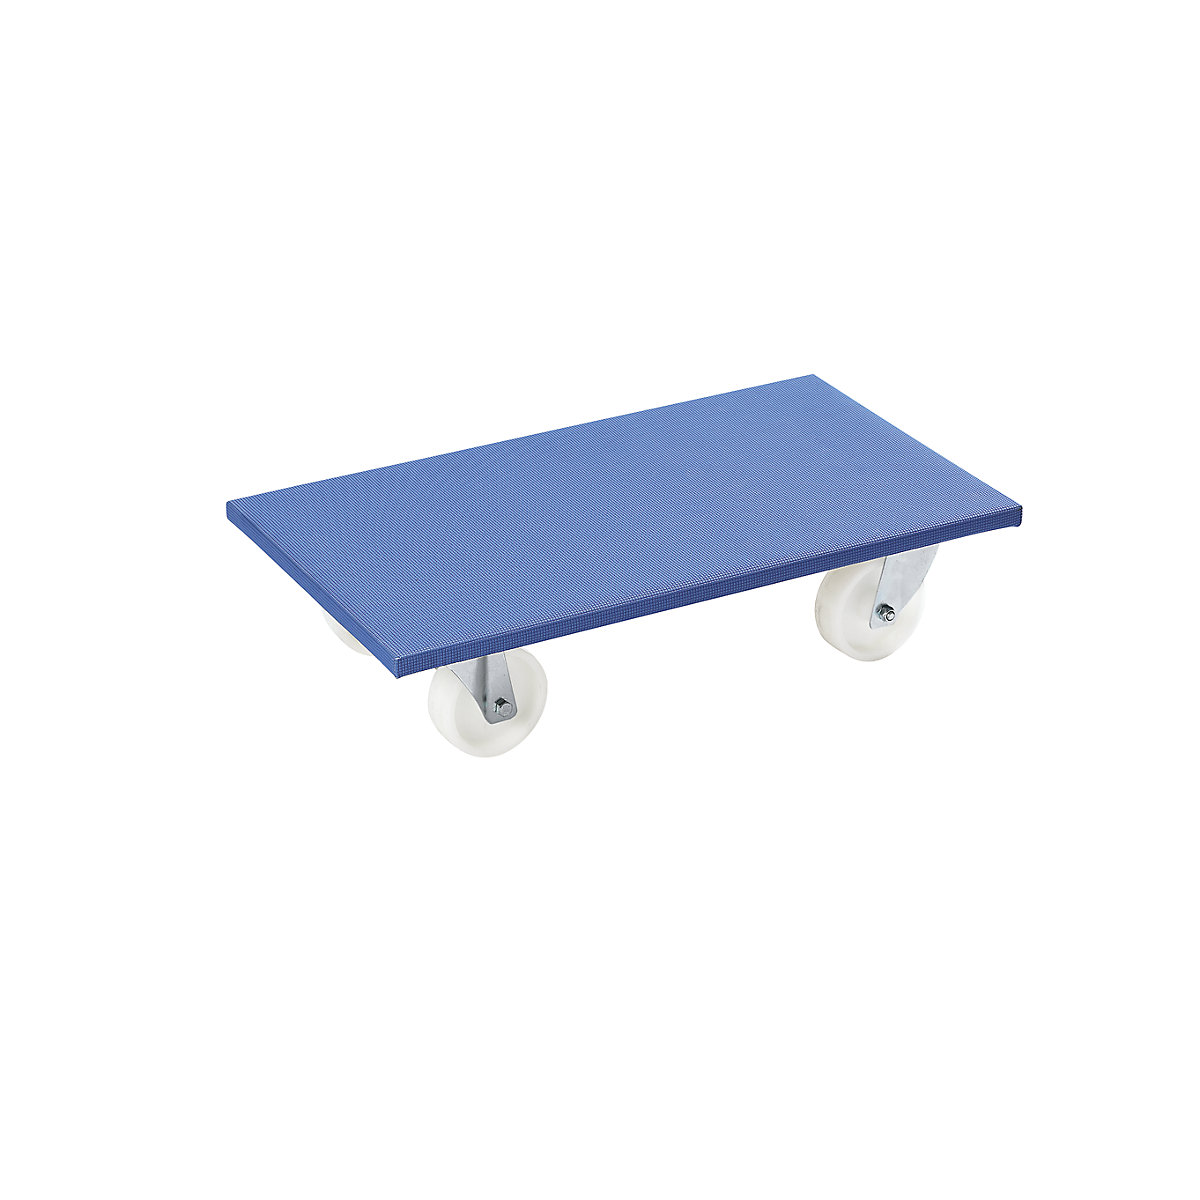 Furniture dolly, LxWxH 600 x 350 x 145 mm, pack of 2, max. load 500 kg, 5+ packs-6